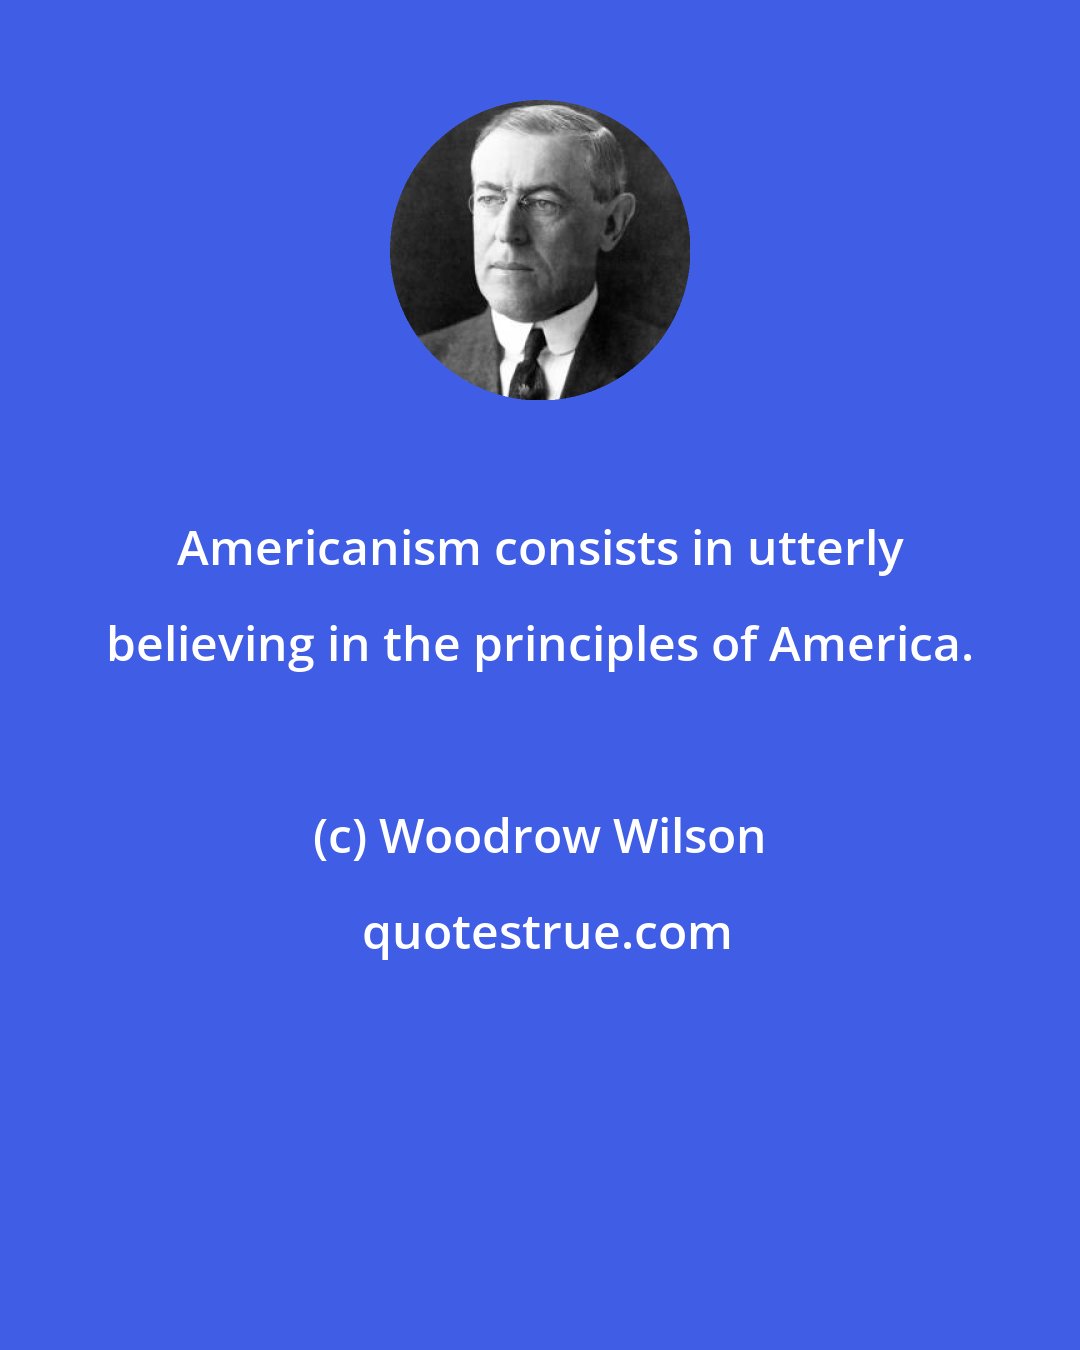 Woodrow Wilson: Americanism consists in utterly believing in the principles of America.